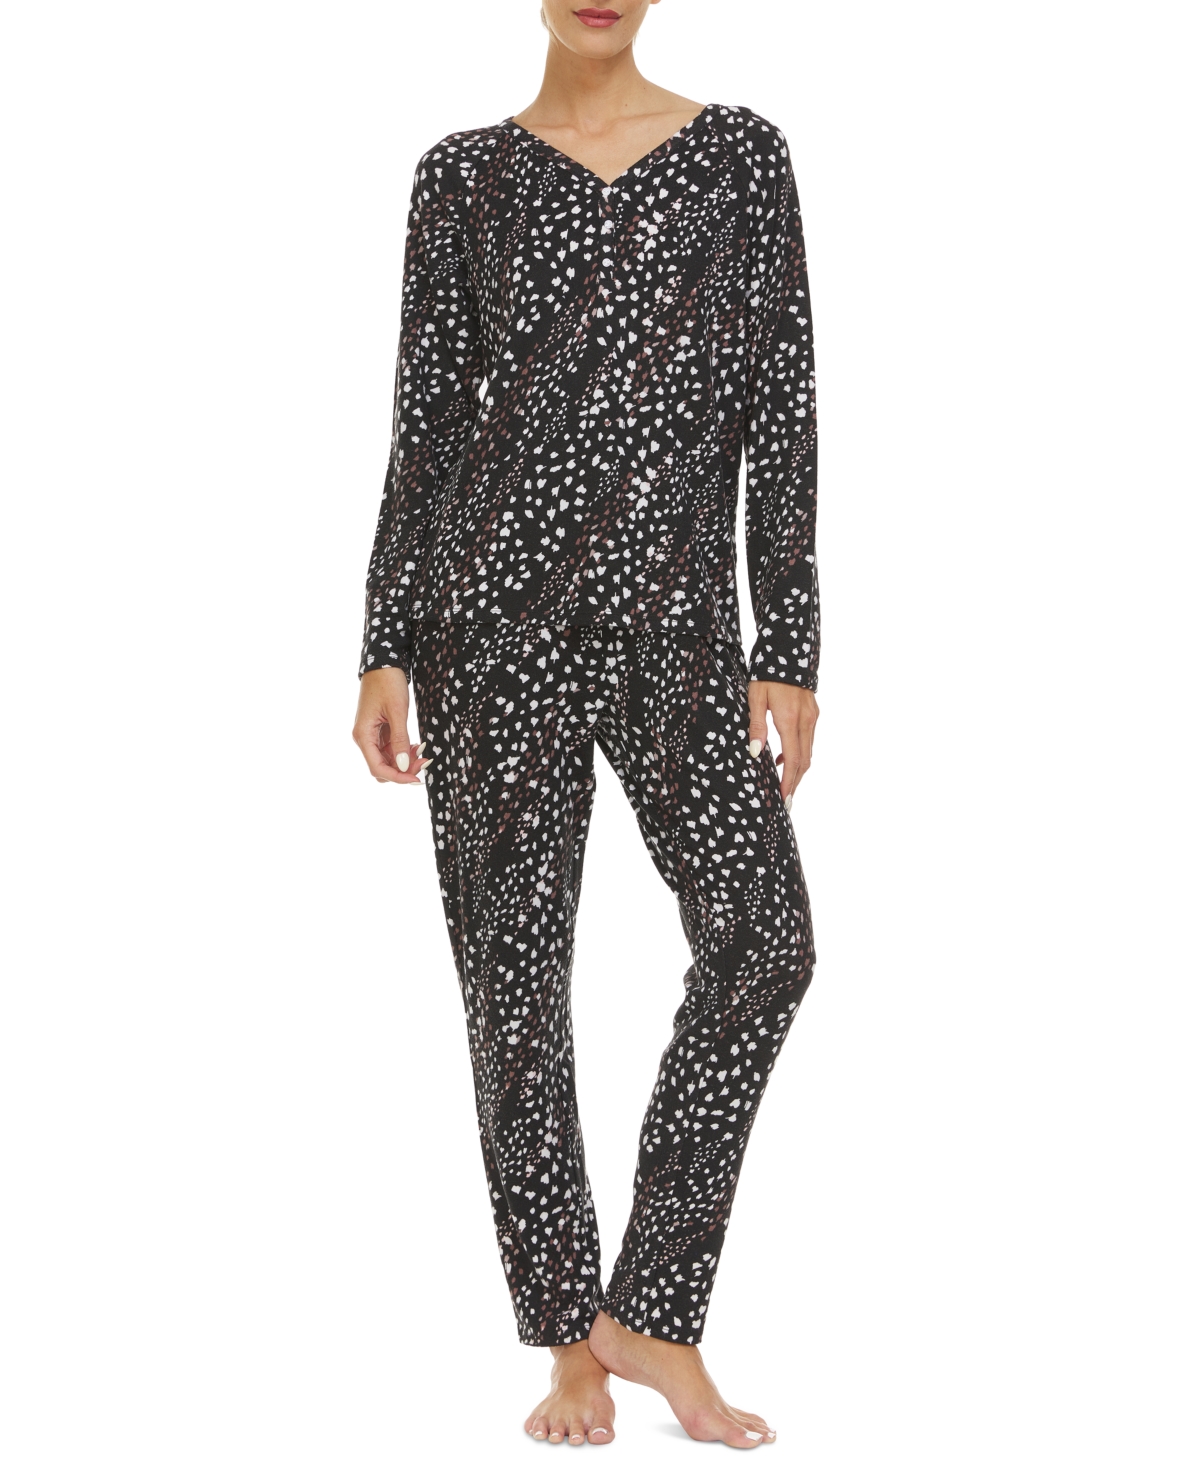 Flora by Flora Nikrooz Women's Colby Sweater Knit Pajamas Set